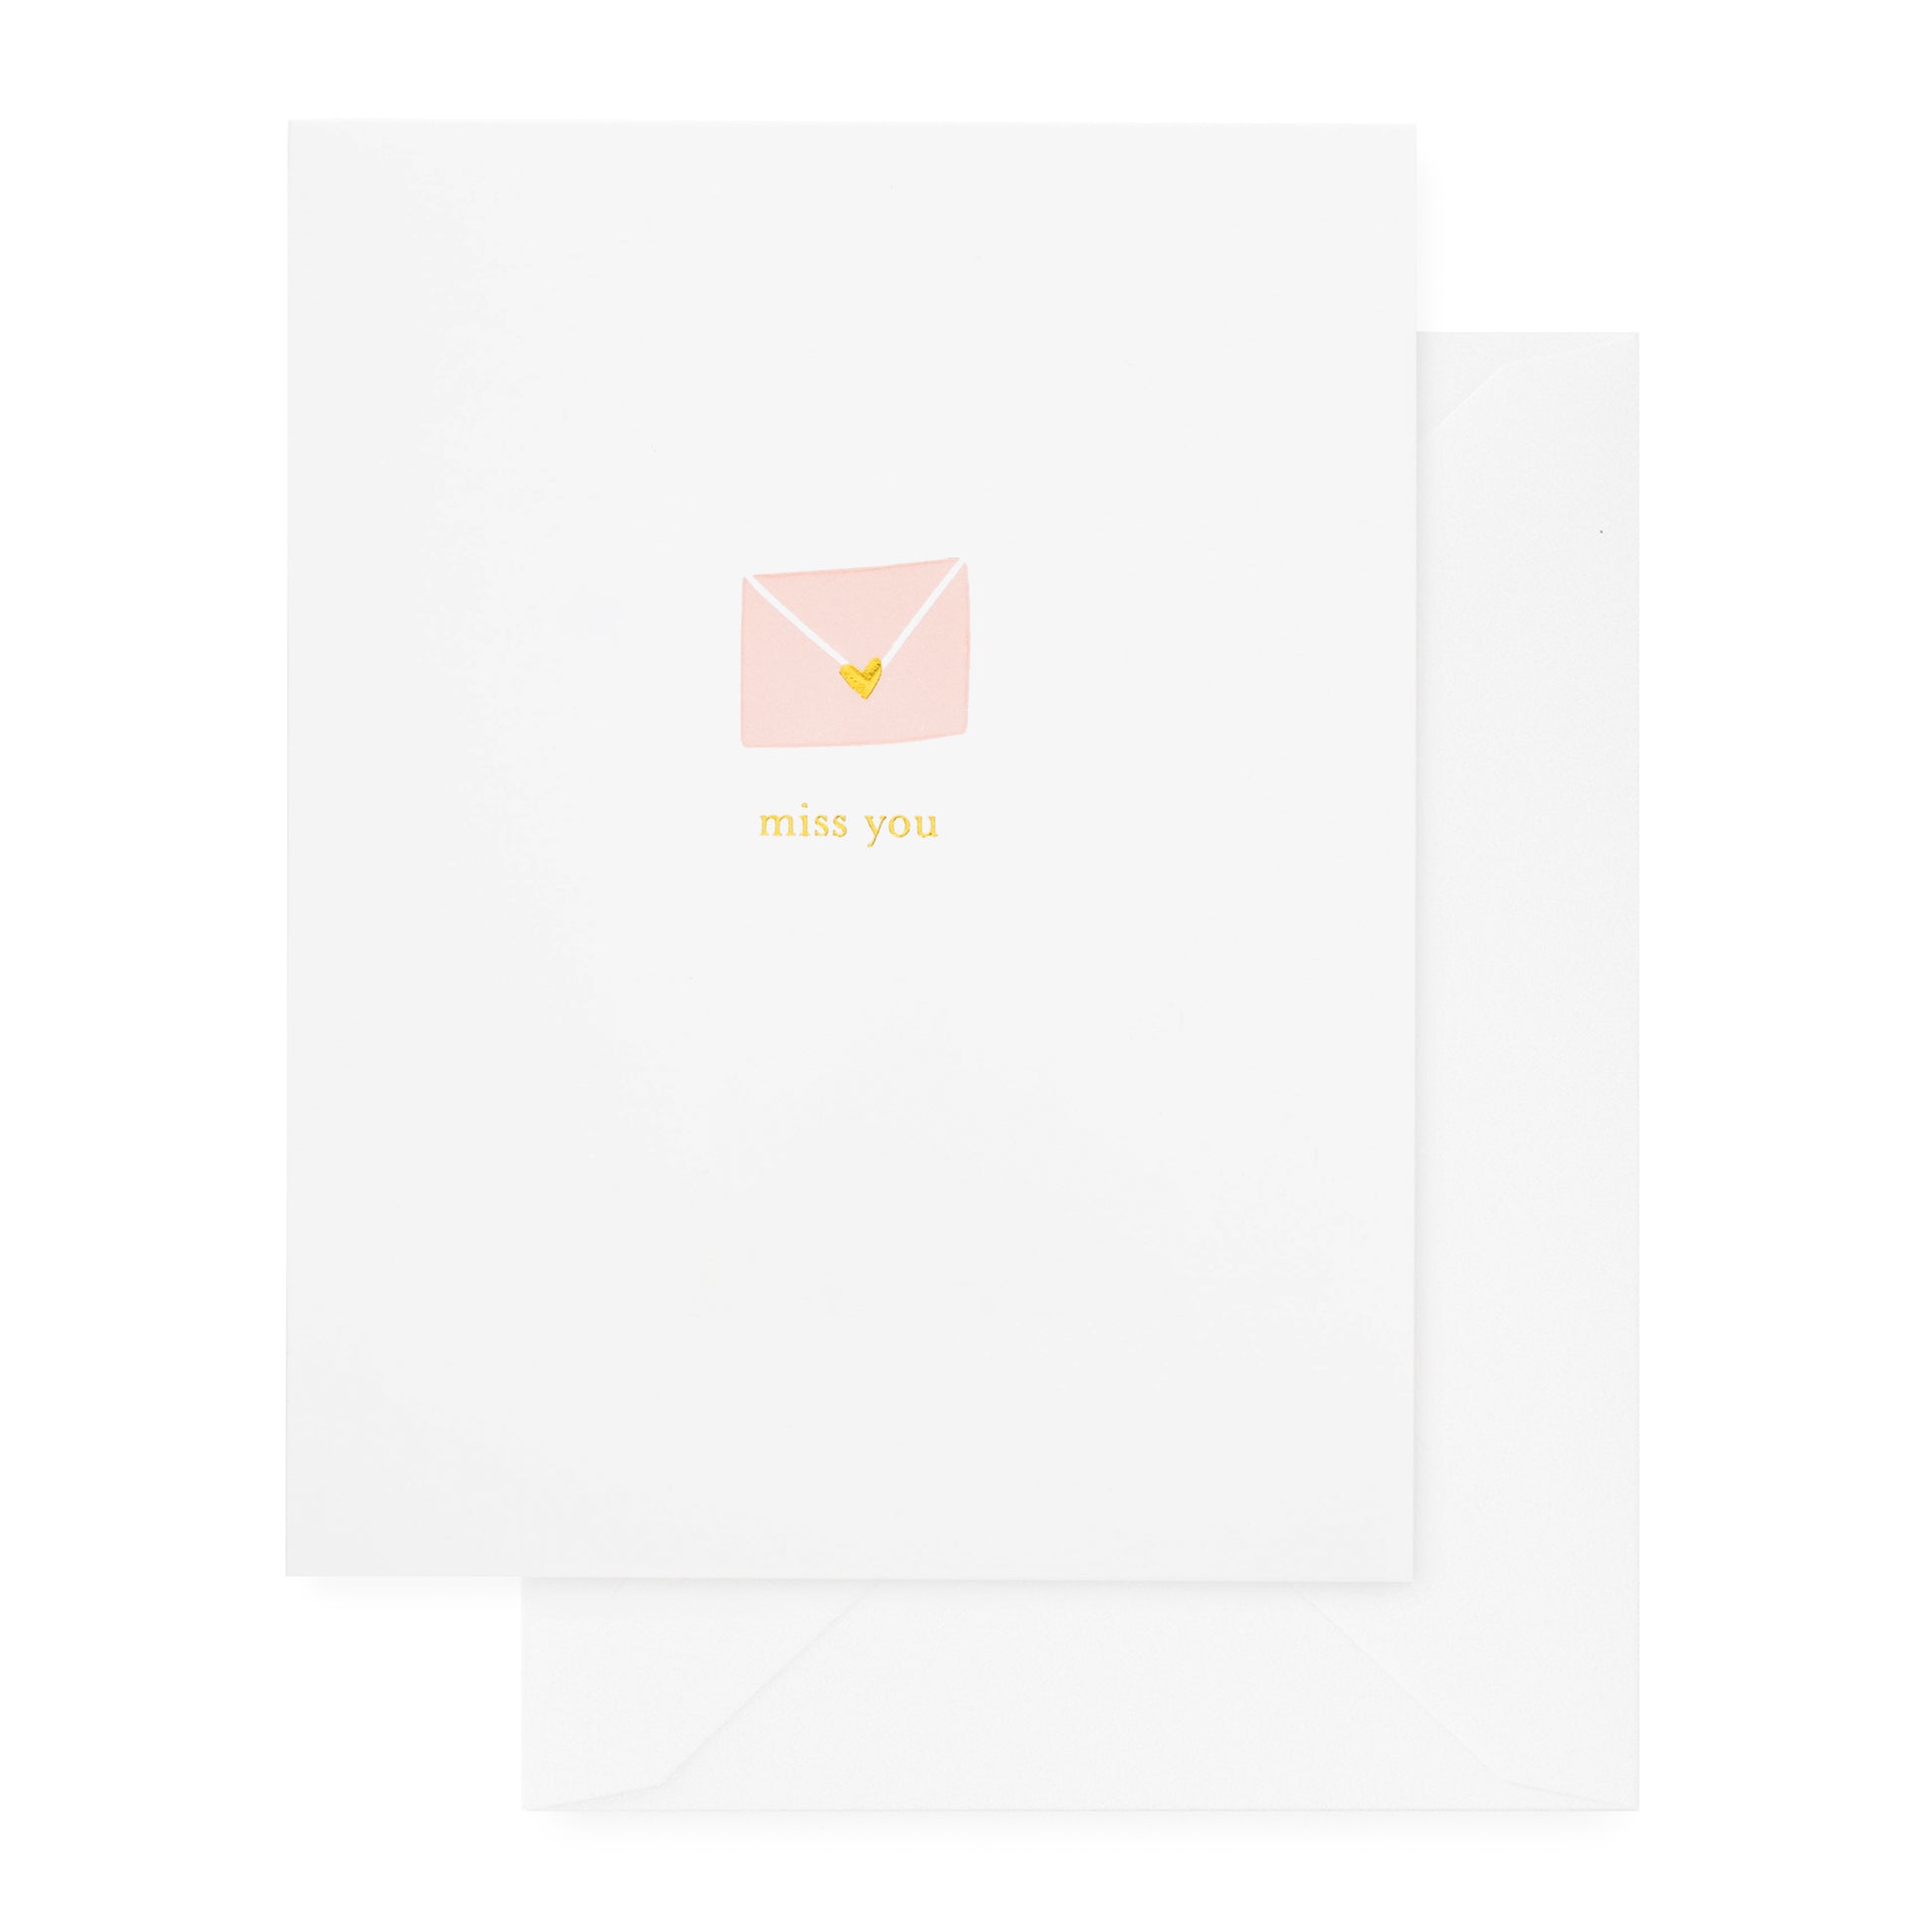 Miss you card with a pink envelope with gold heart